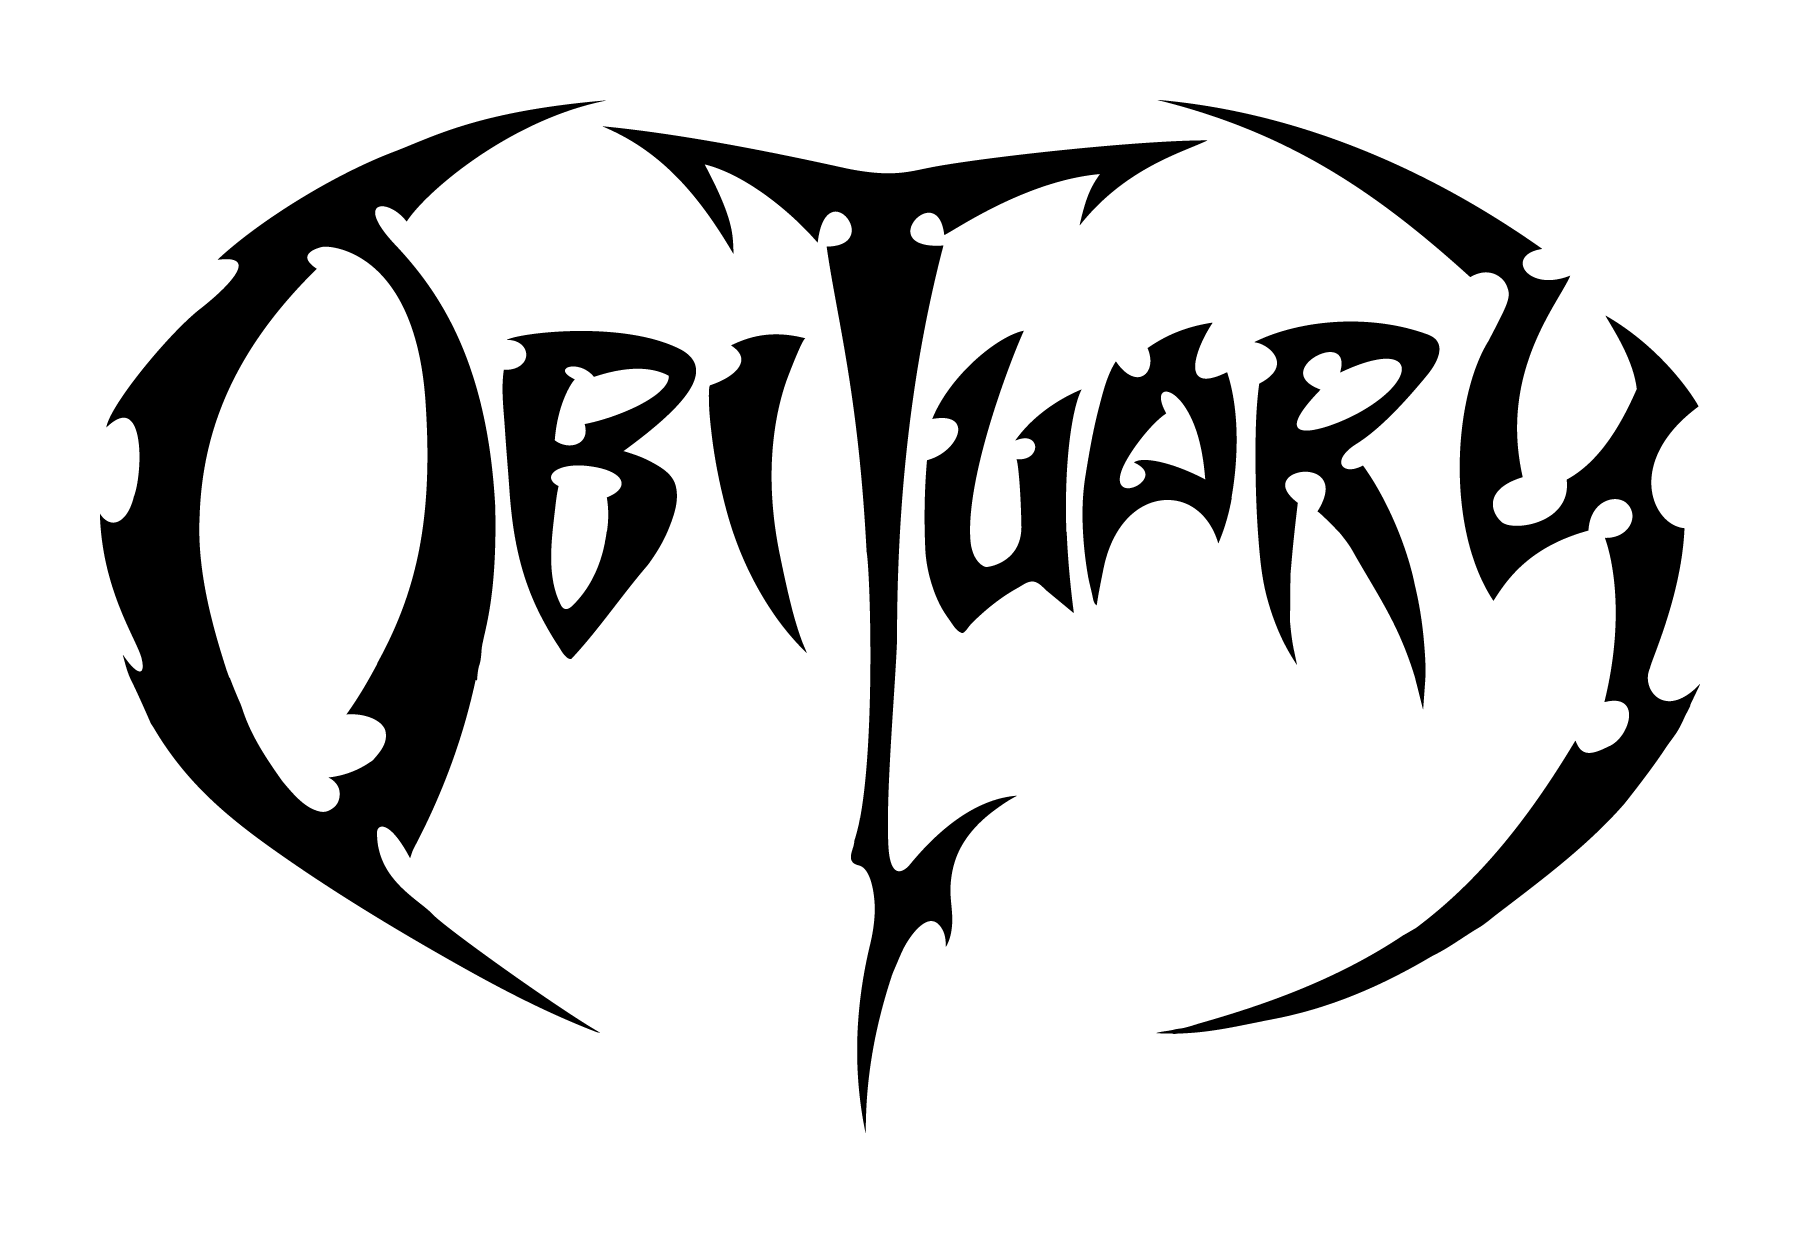 obituary – “i want to be remembered for obituary, but also just hope that i can be remembered for a great drummer that loved playing well”